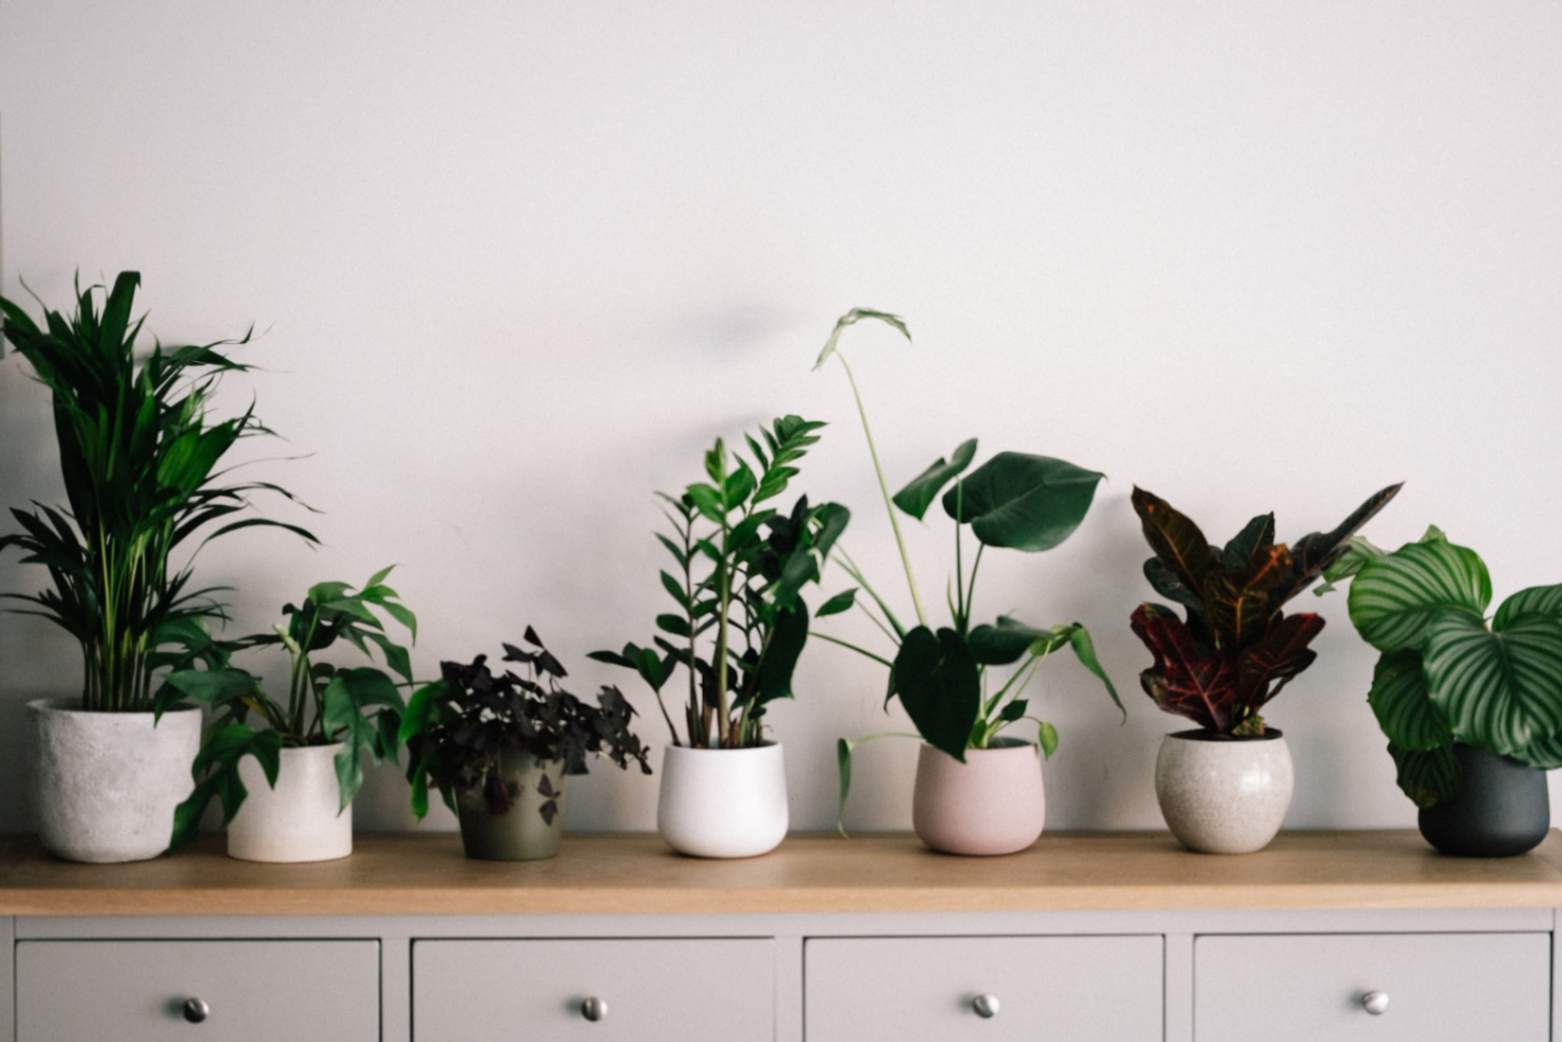 Indoor Plants as Gift, A Thoughtful Gesture to Health